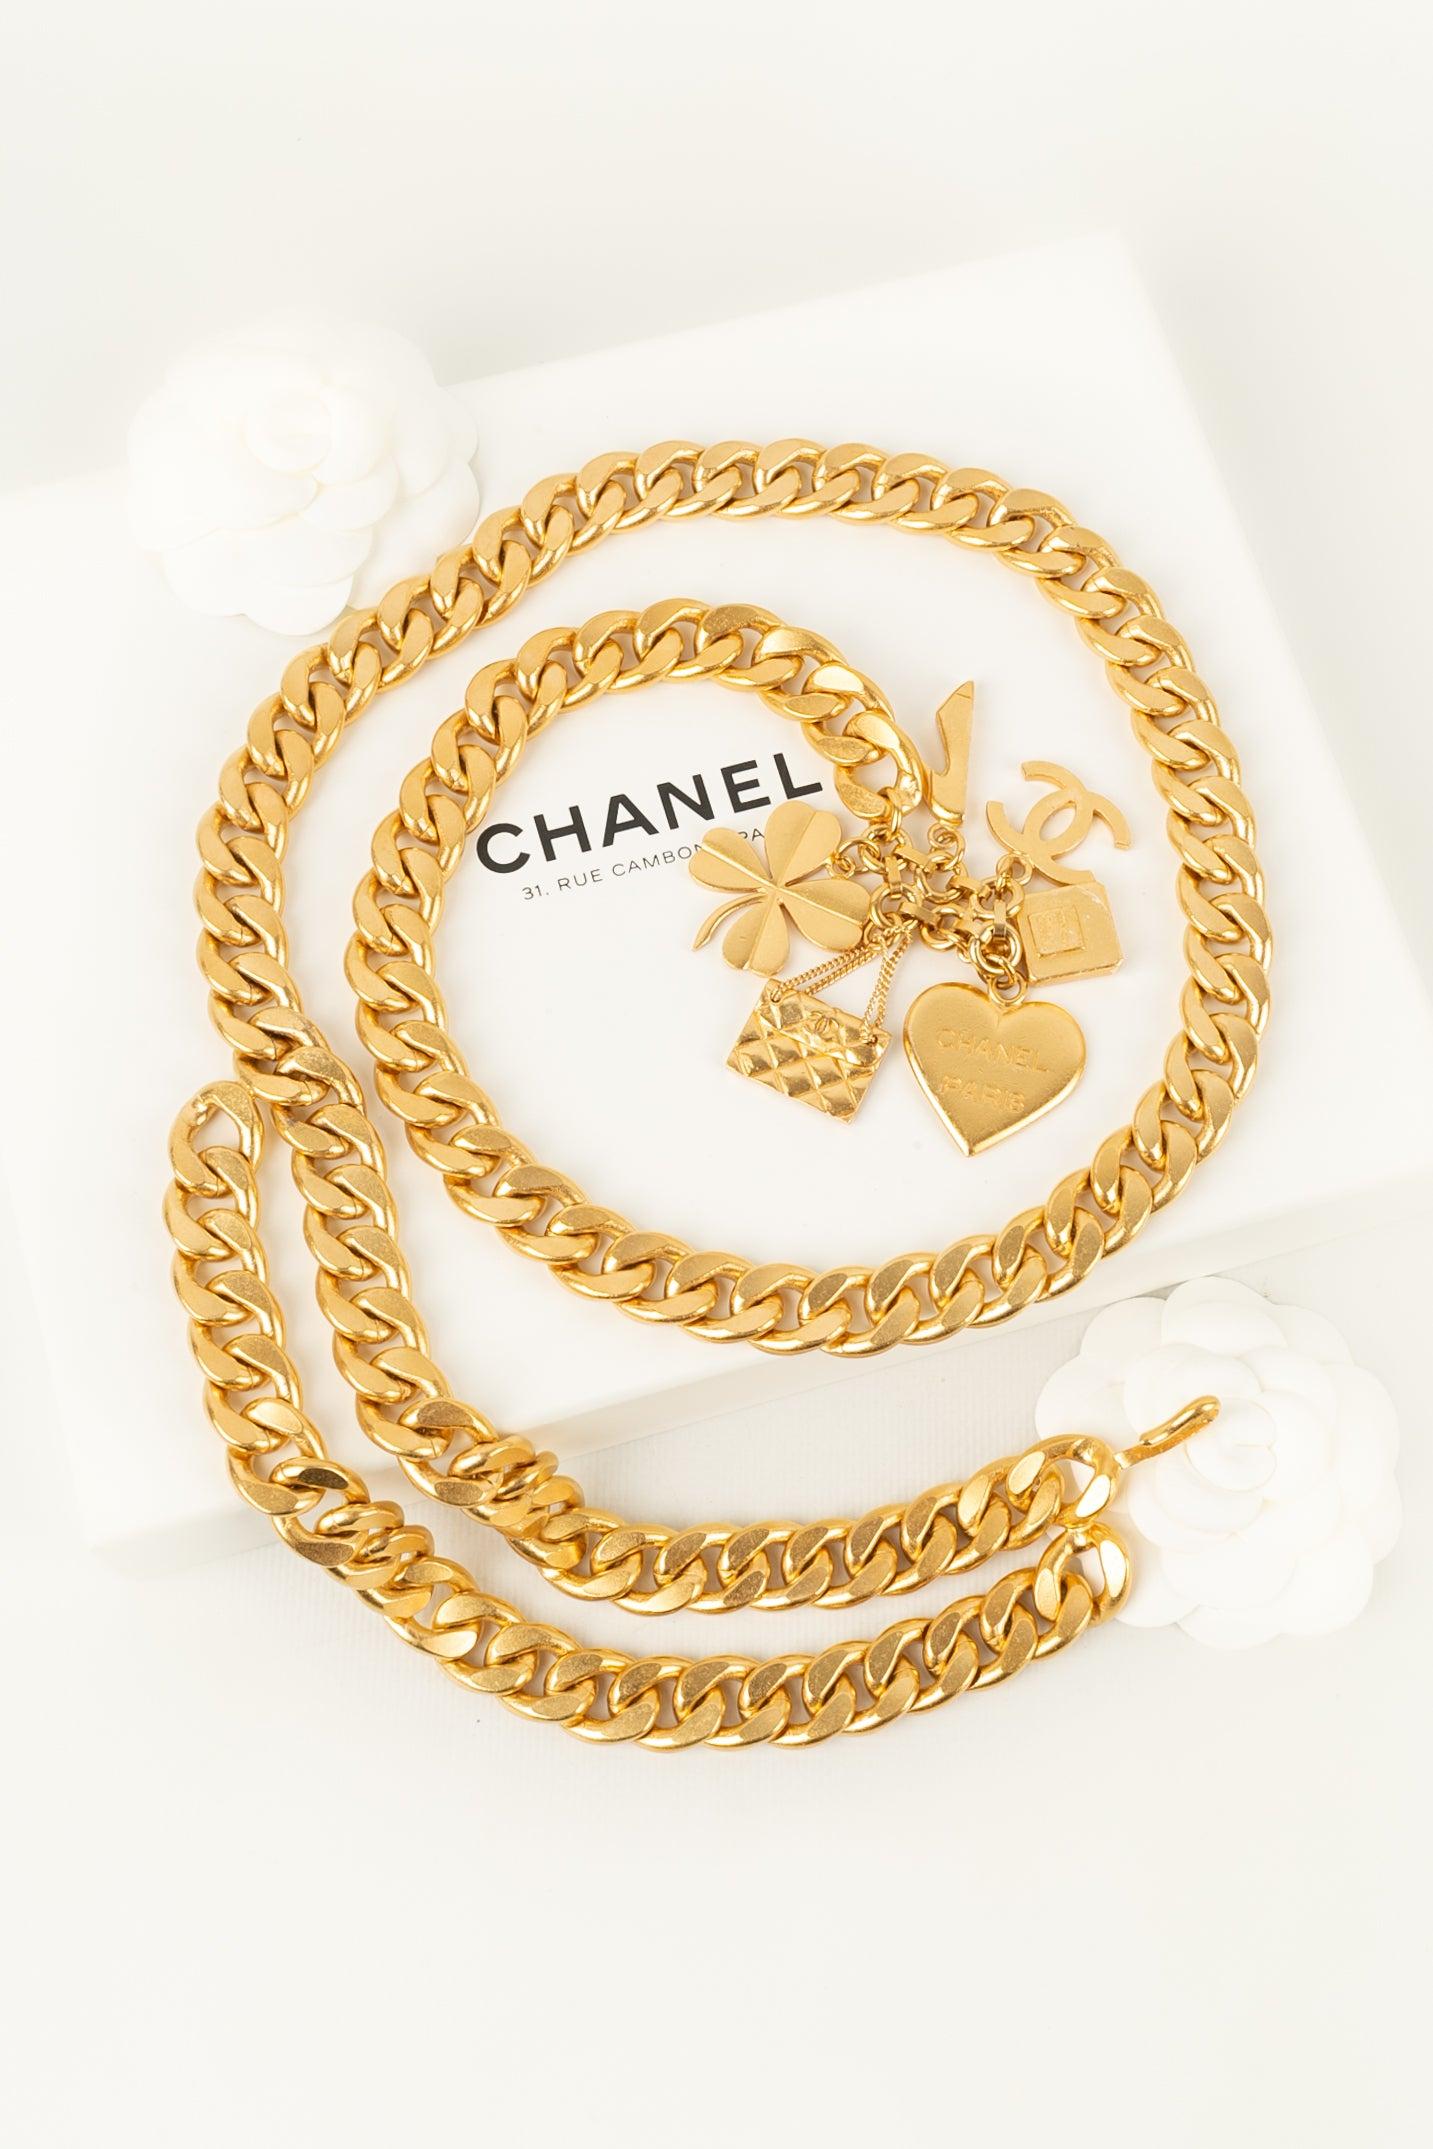 Chanel Belt Composed of Chains in Gold-Plated Metal, 1995 For Sale 4